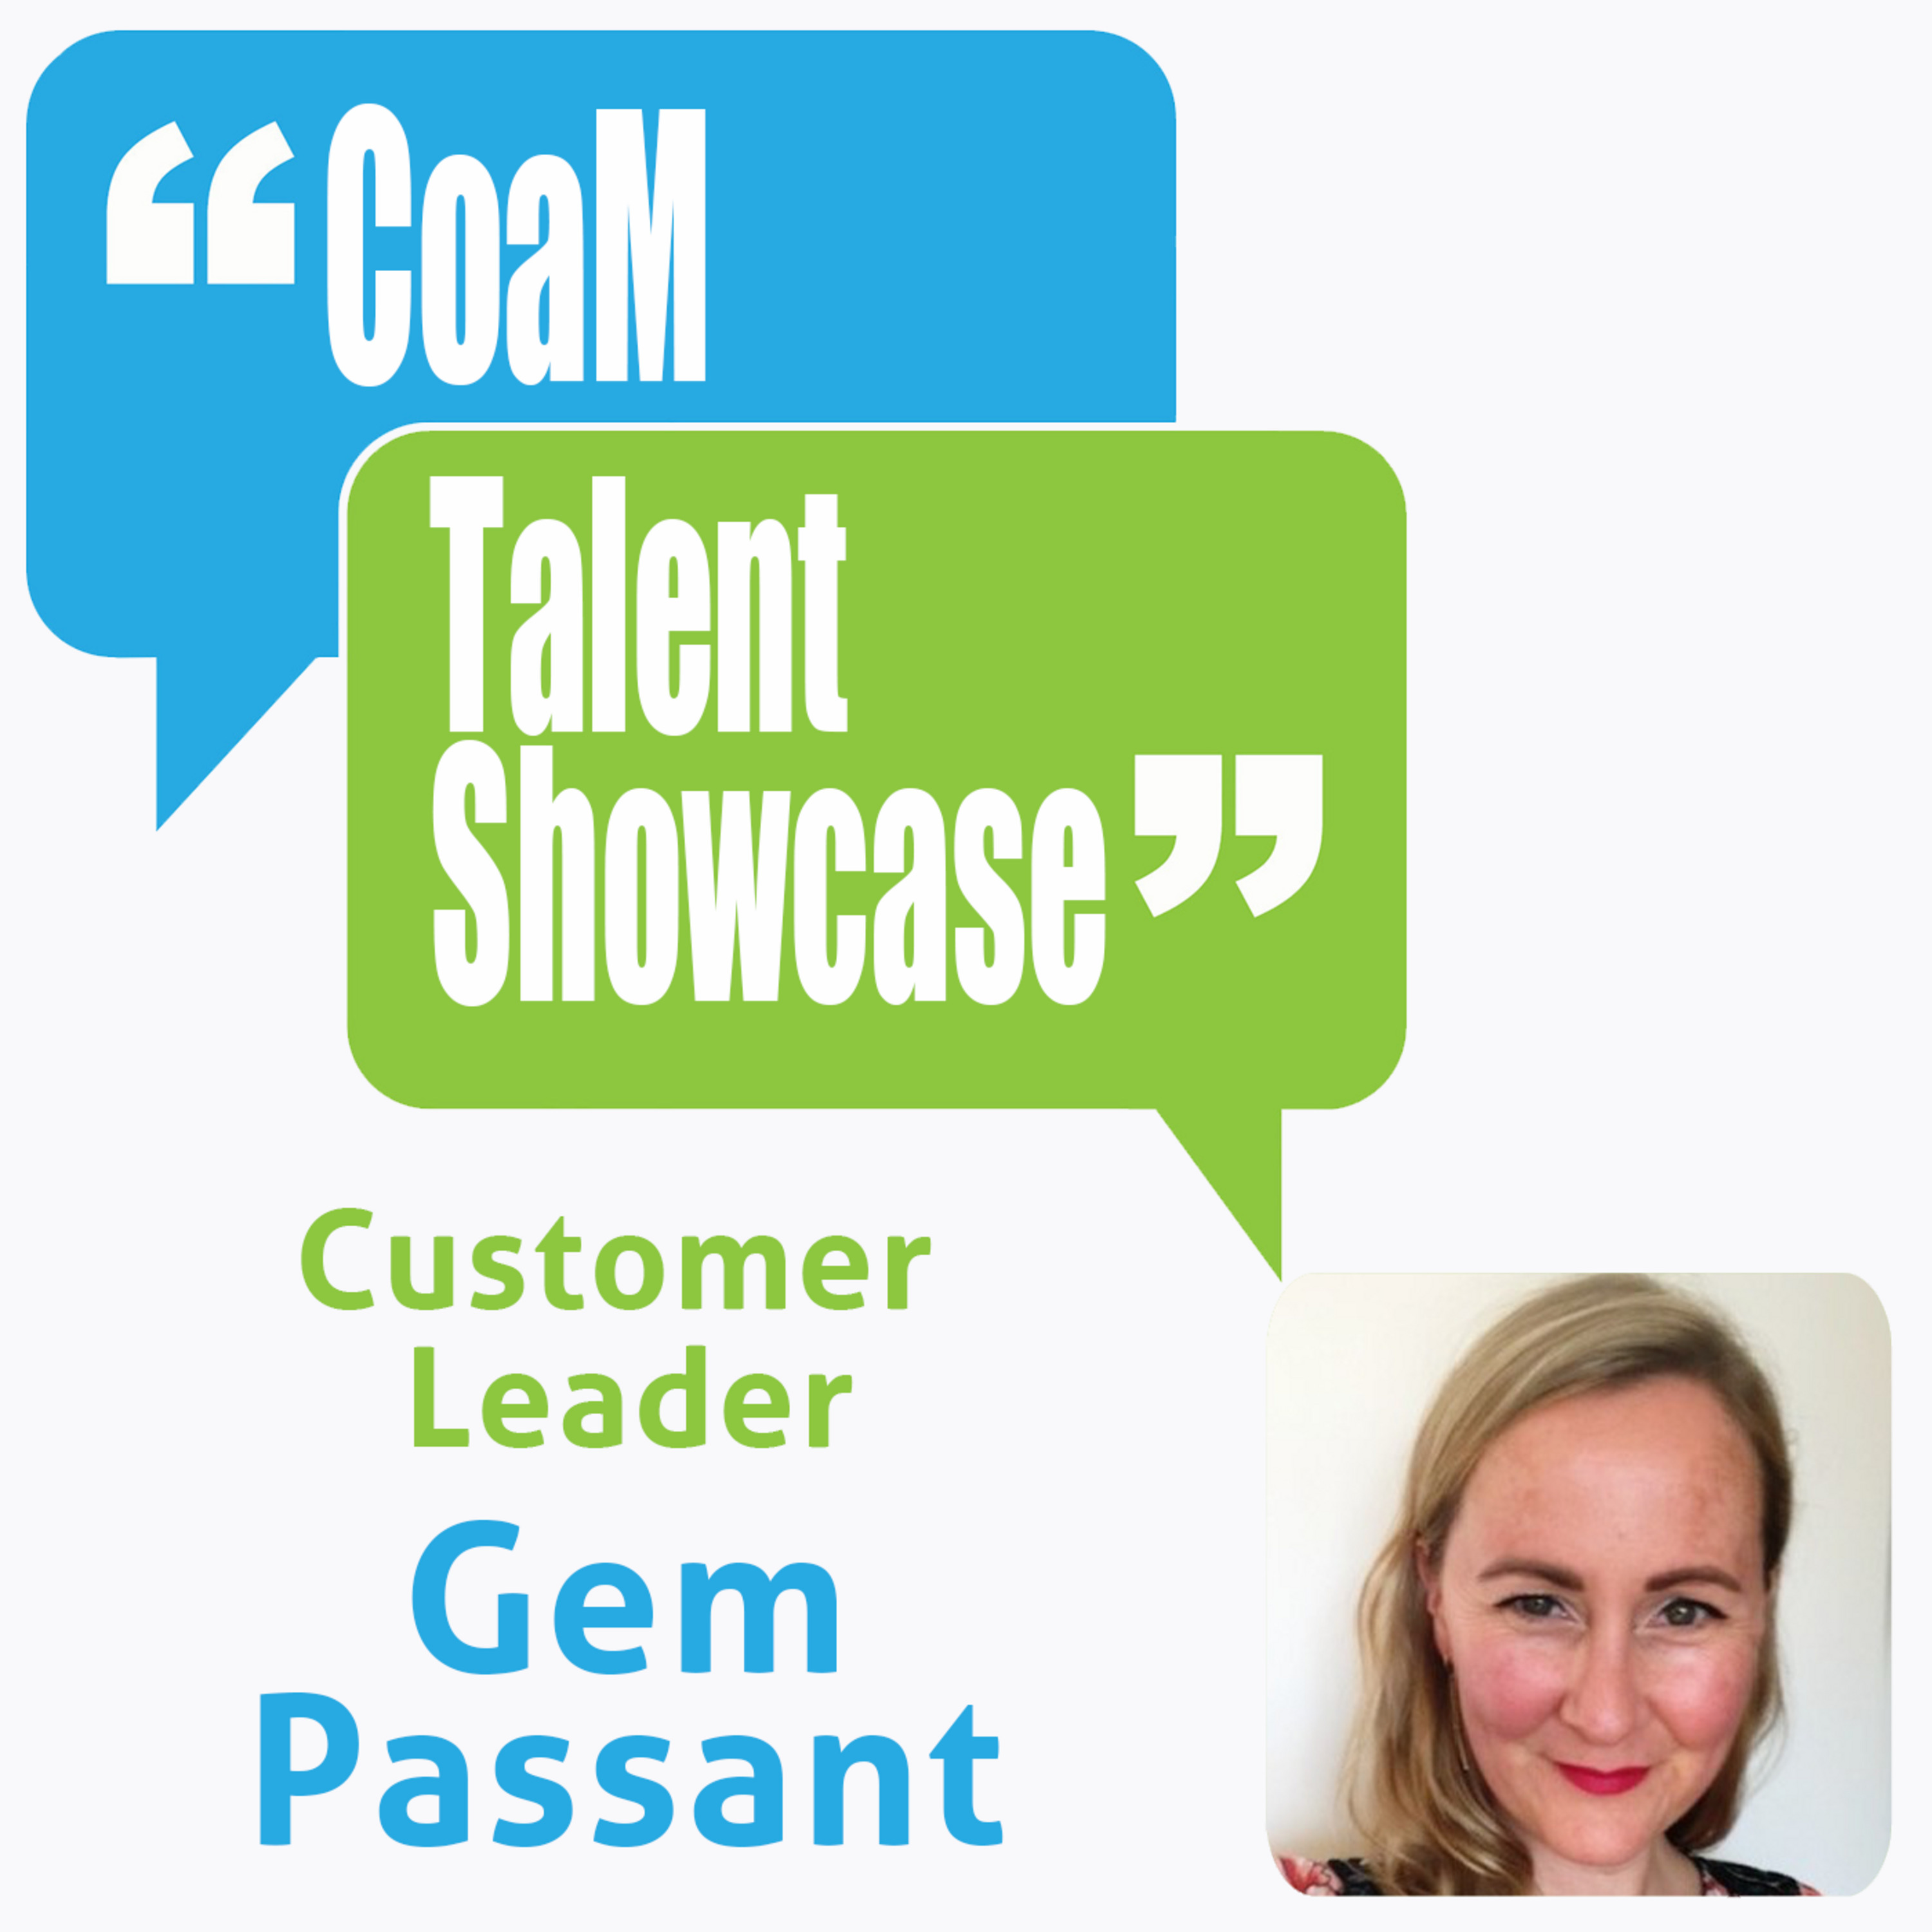 Gem Passant: Customer leader with a focus on marketing through customer advocacy